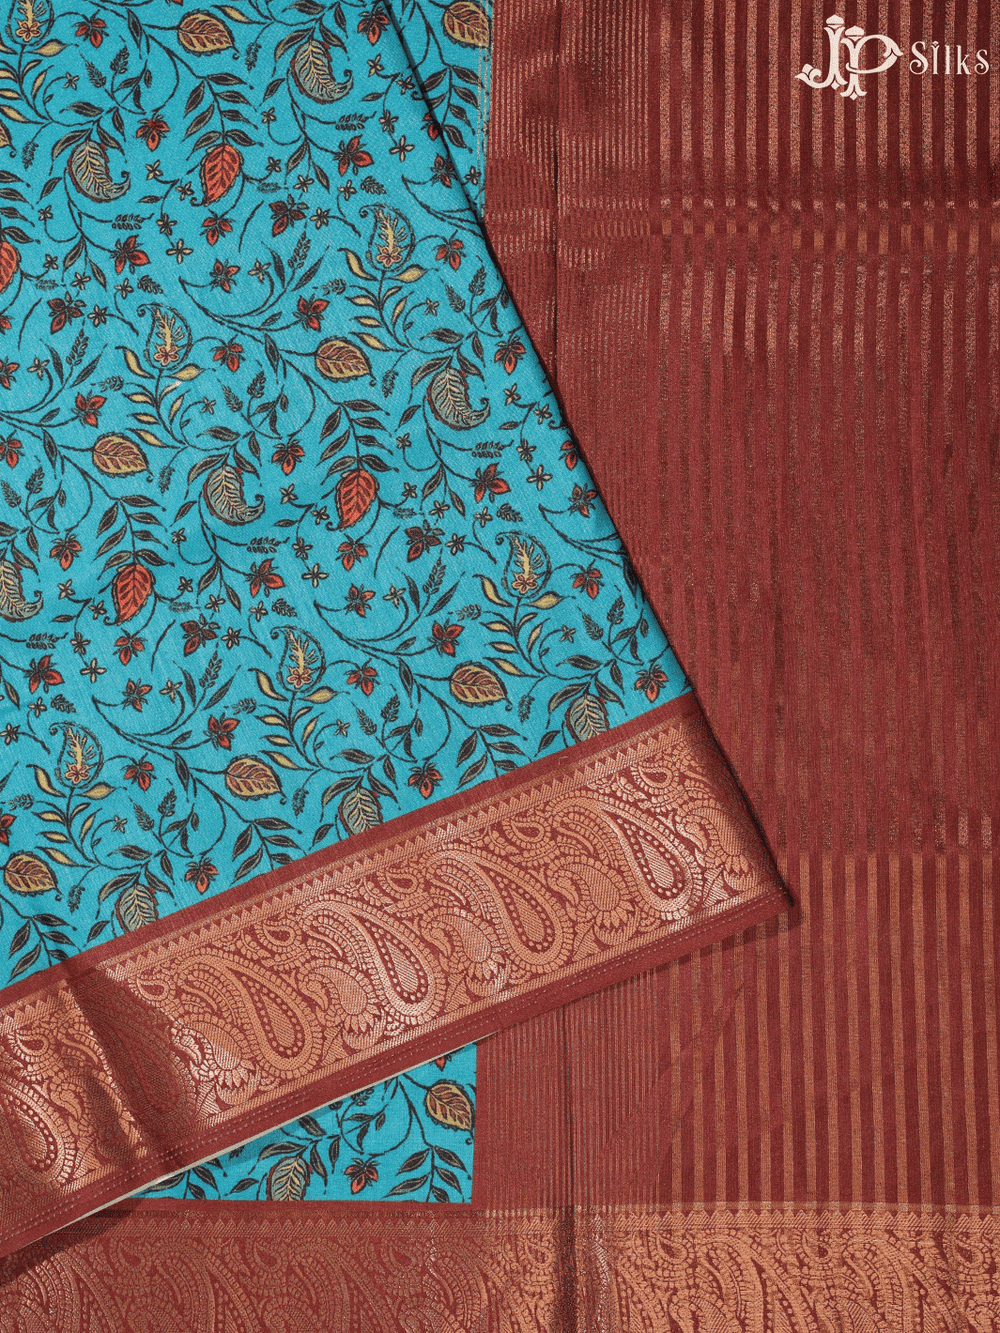 Blue and Brown Floral Design Semi Tussar Fancy Saree - E3993 - View 1